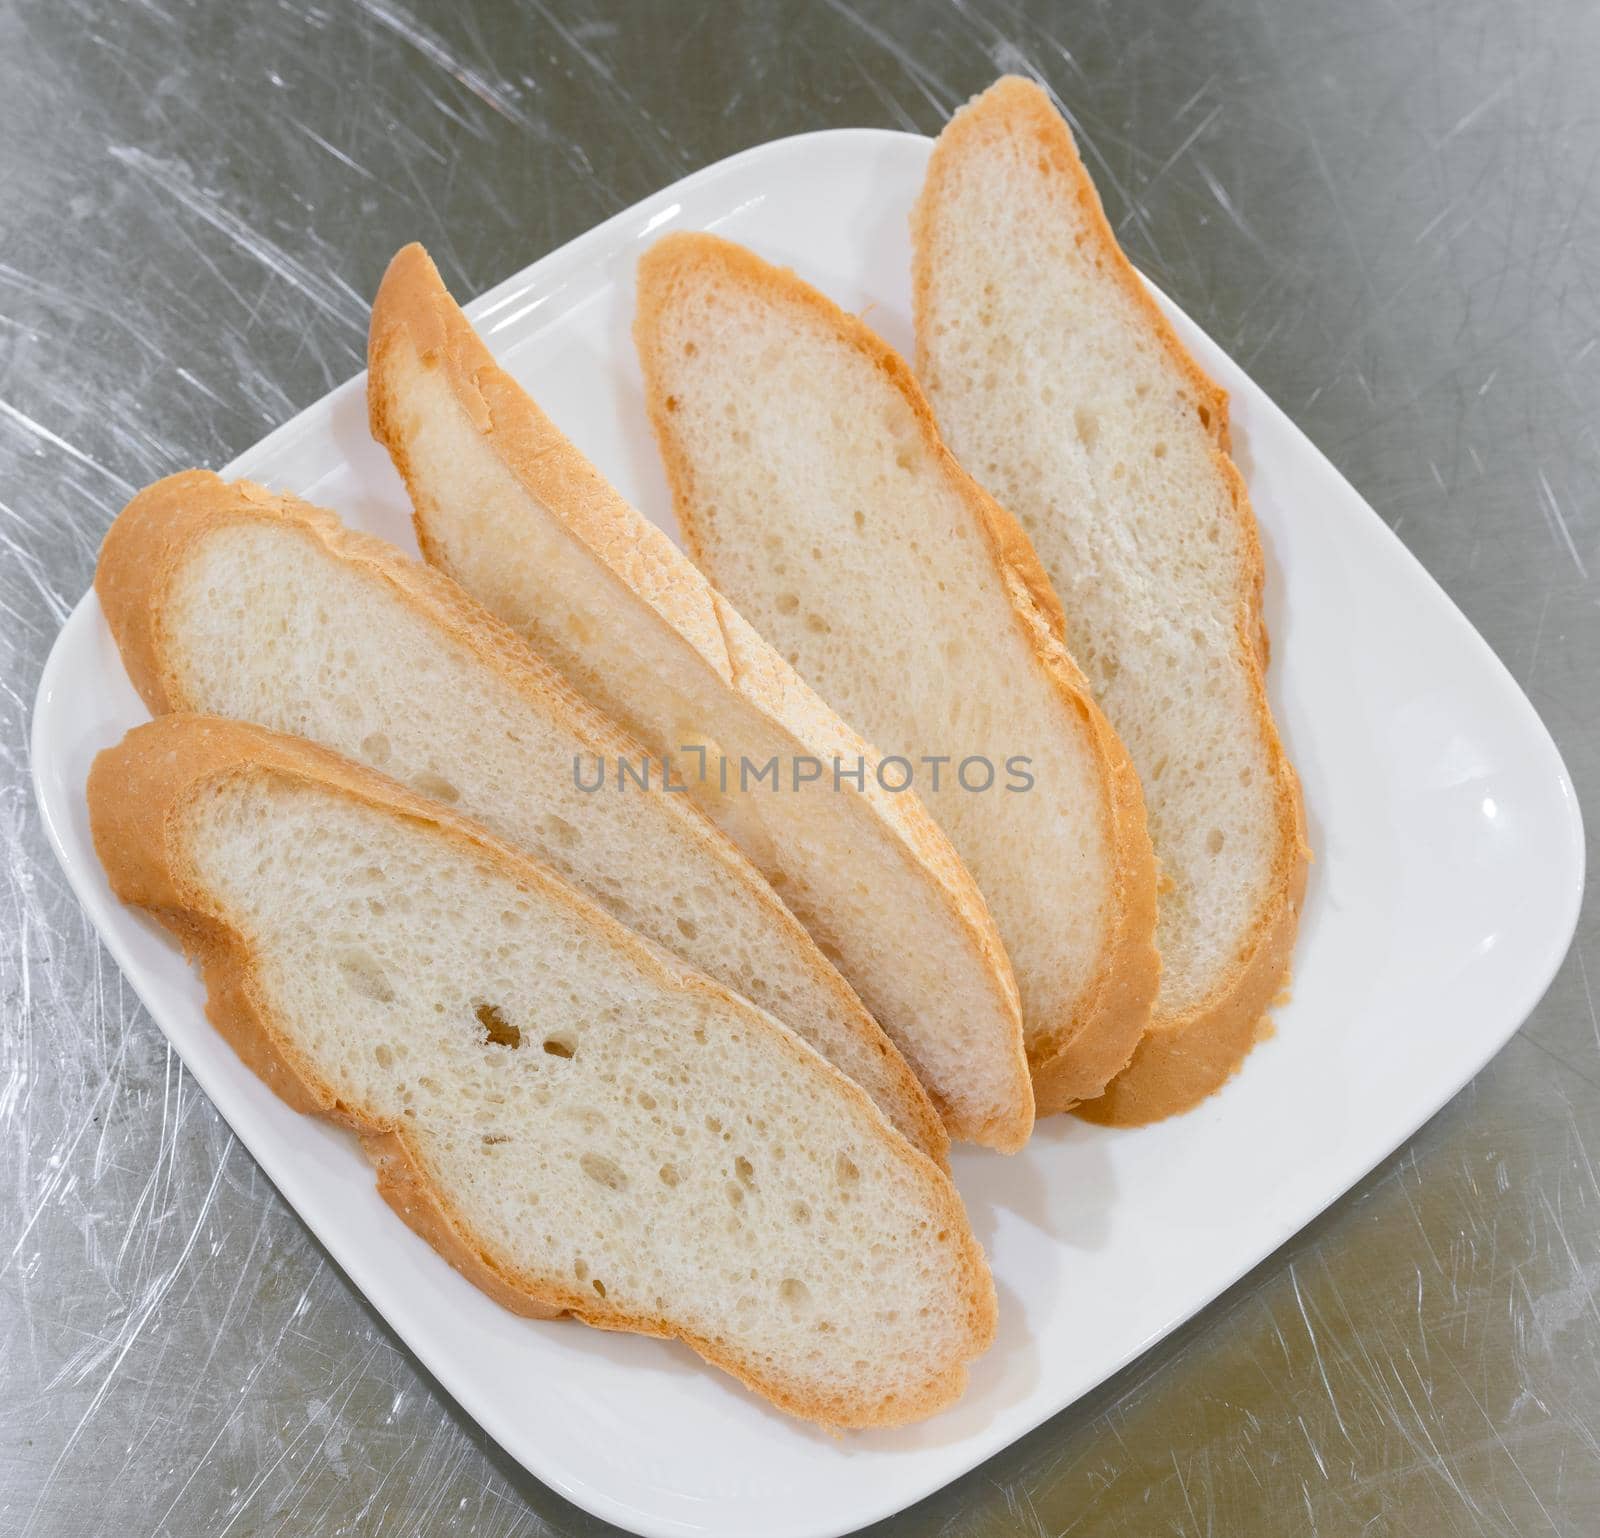 Bread sliced in plate on stainless table by Buttus_casso